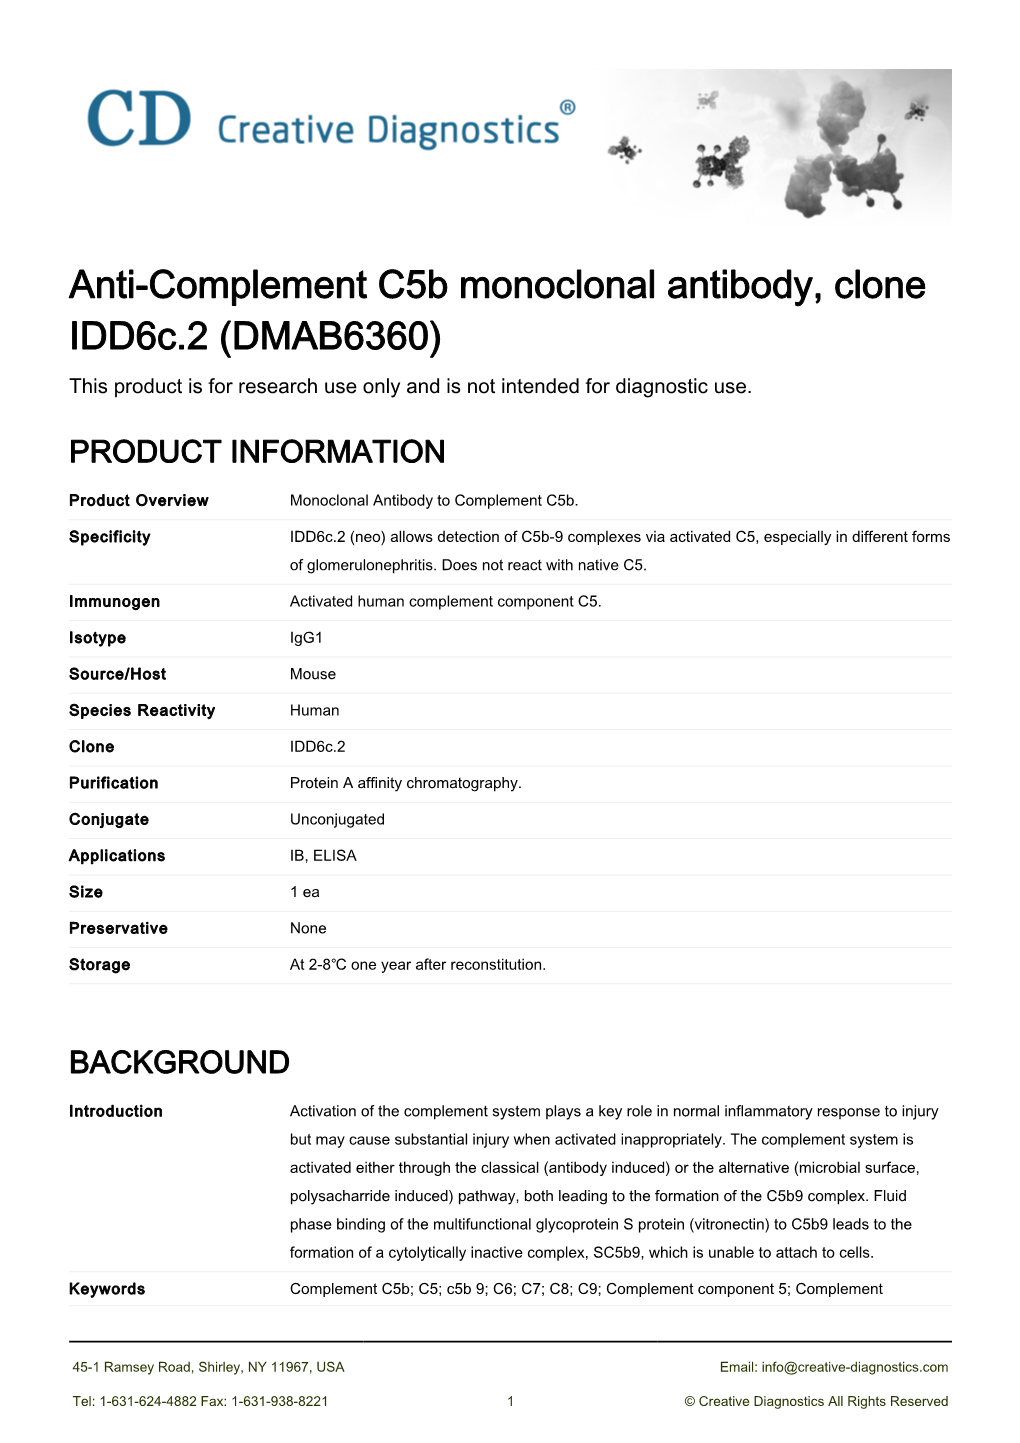 Anti-Complement C5b Monoclonal Antibody, Clone Idd6c.2 (DMAB6360) This Product Is for Research Use Only and Is Not Intended for Diagnostic Use